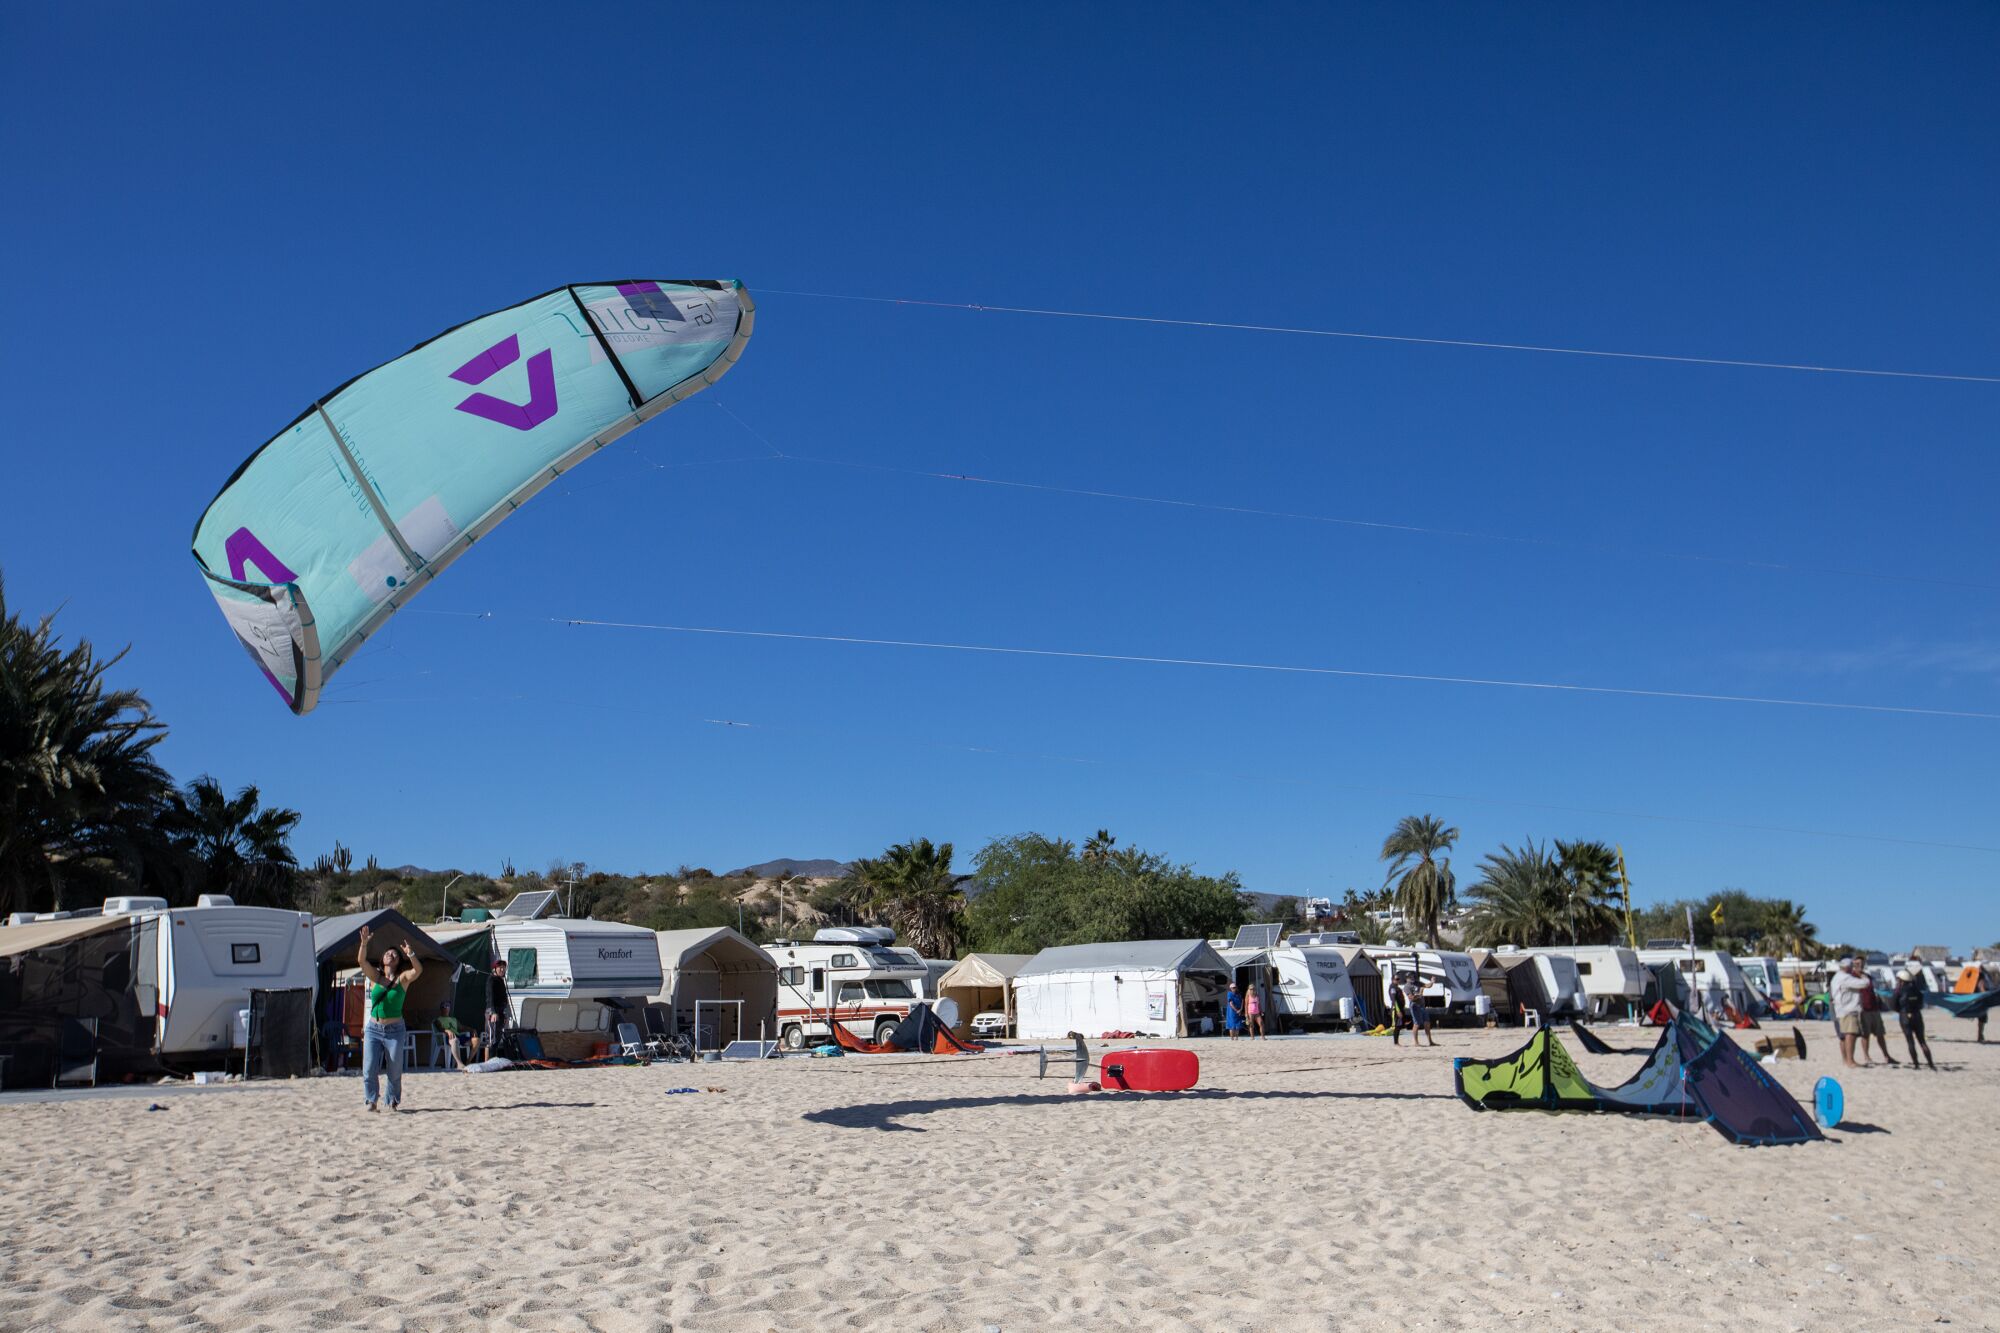 Kites land on the beach at a campground